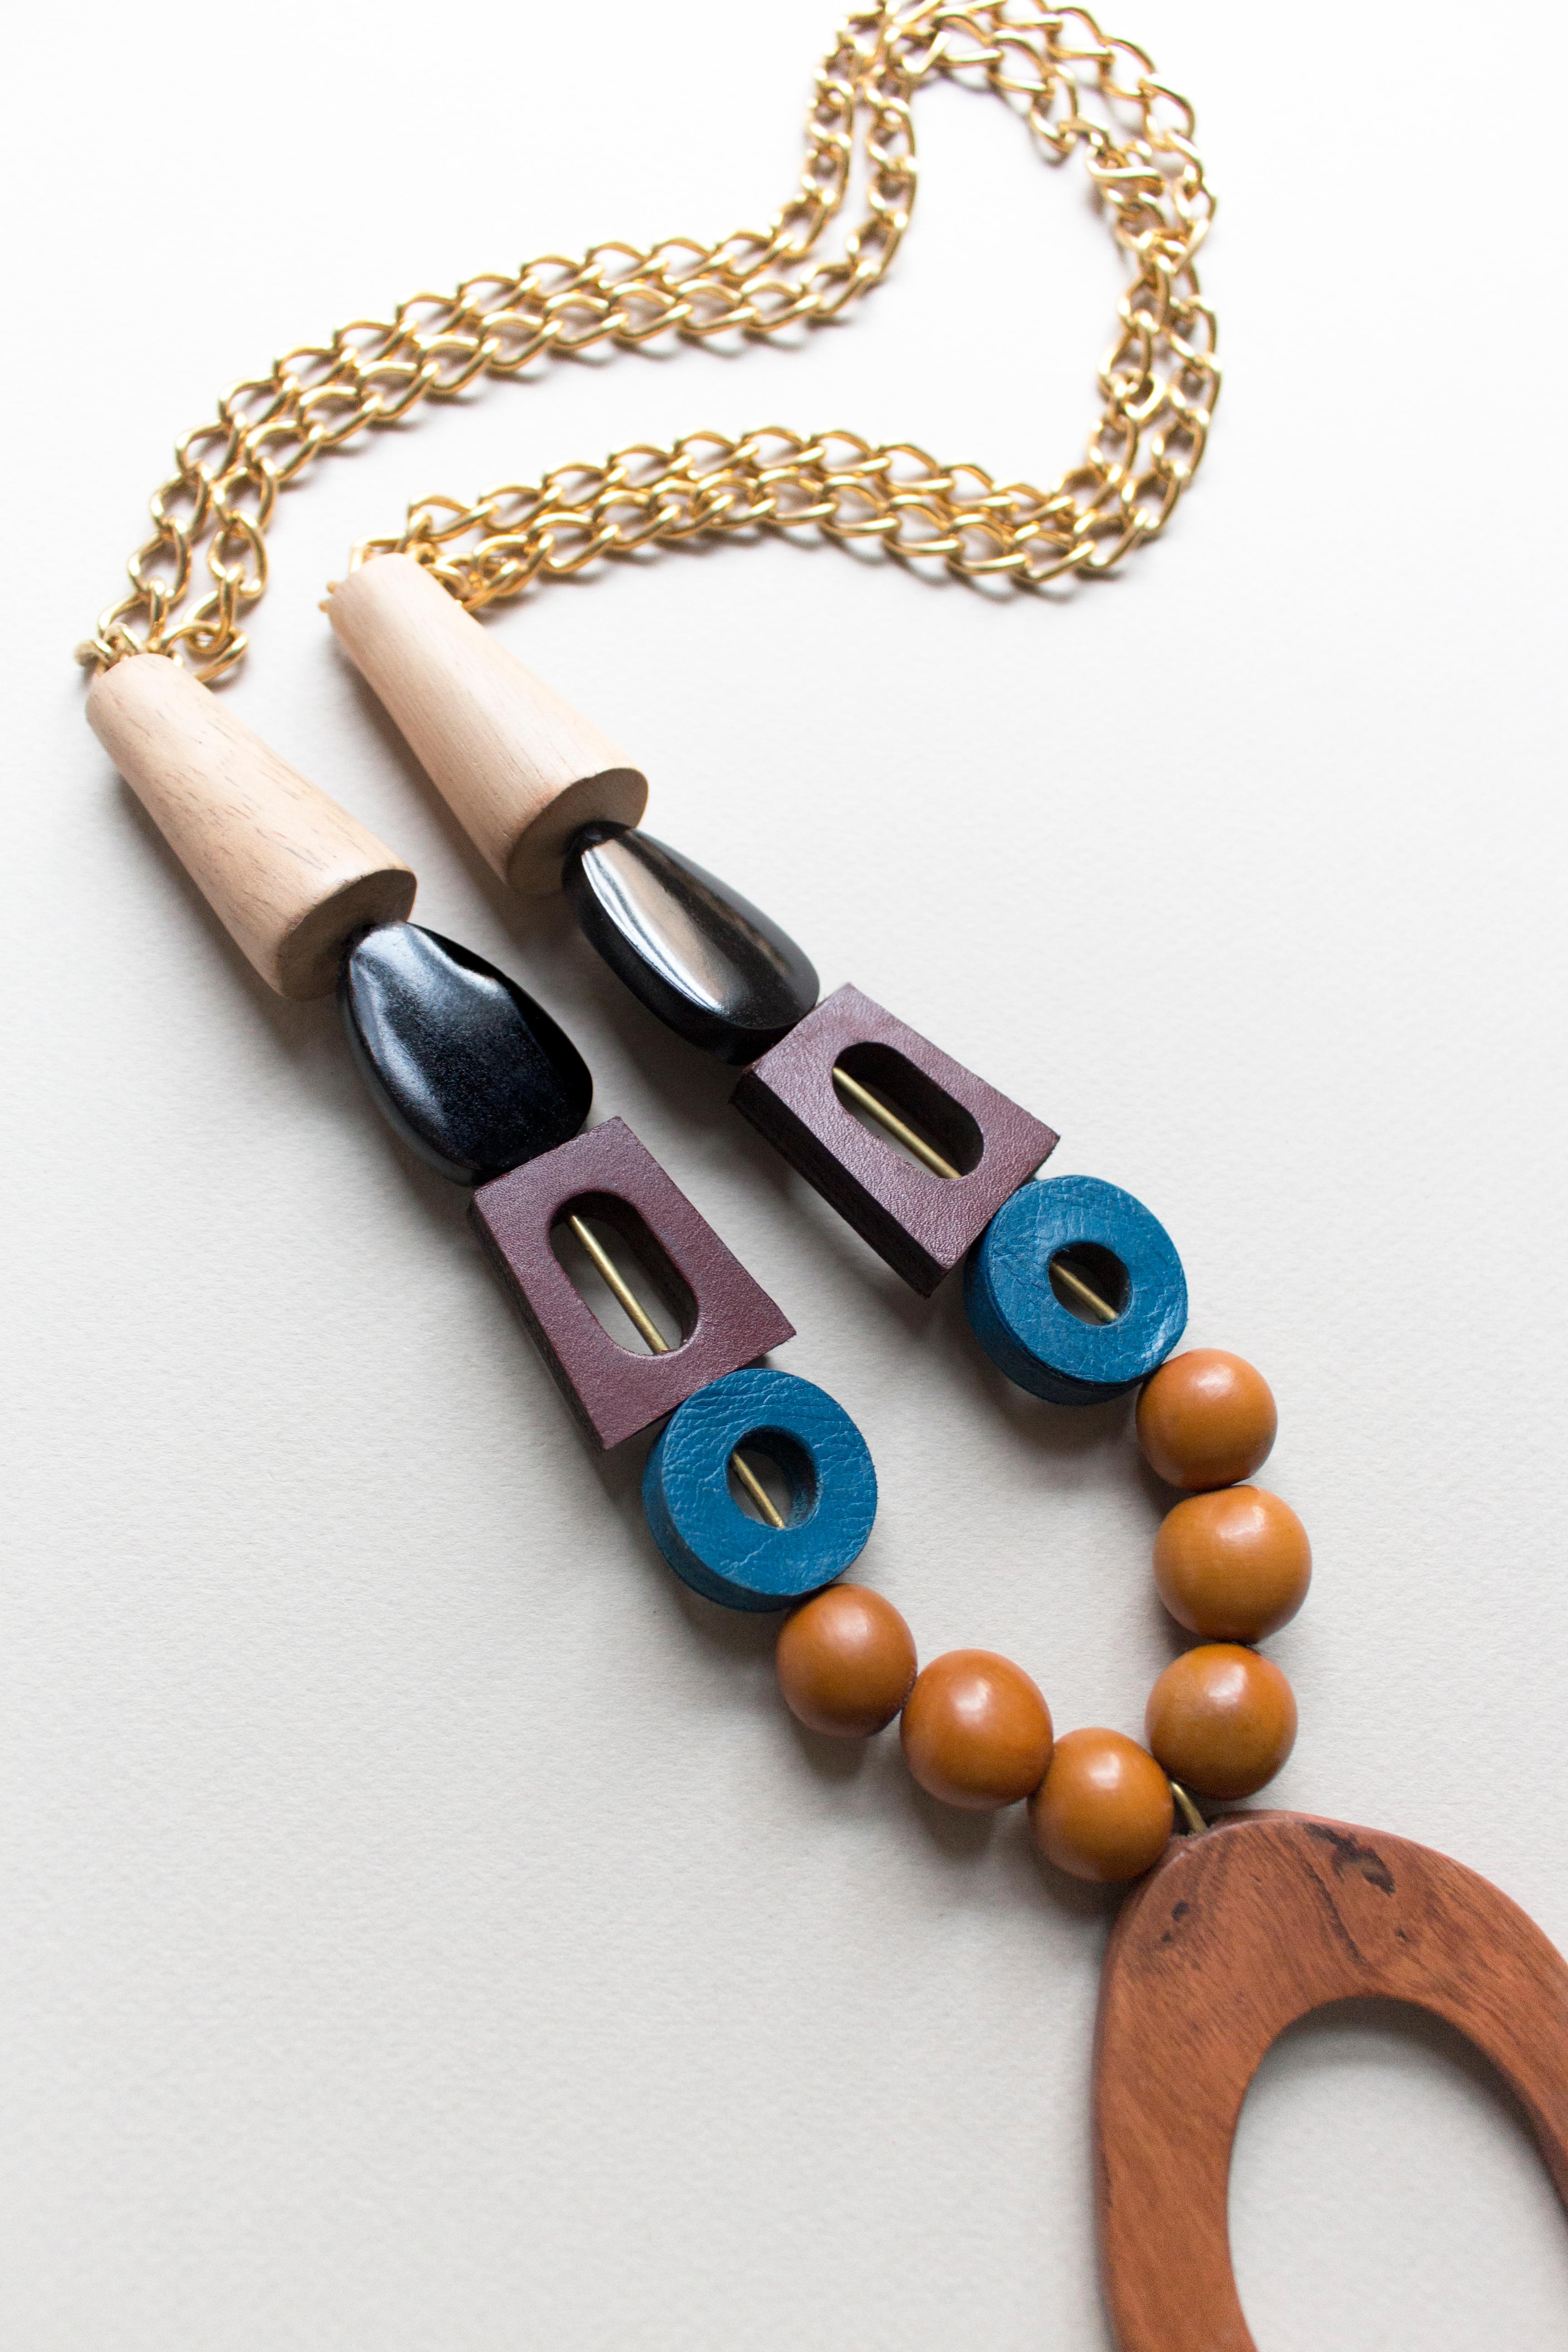 Stunning multi-textured sculptural statement piece inspired by mid-century architectural motifs from the American West. A versatile necklace that can be used as a standout accent on a V-neckline or thrown over a sweater or caftan.

Crafted from hand